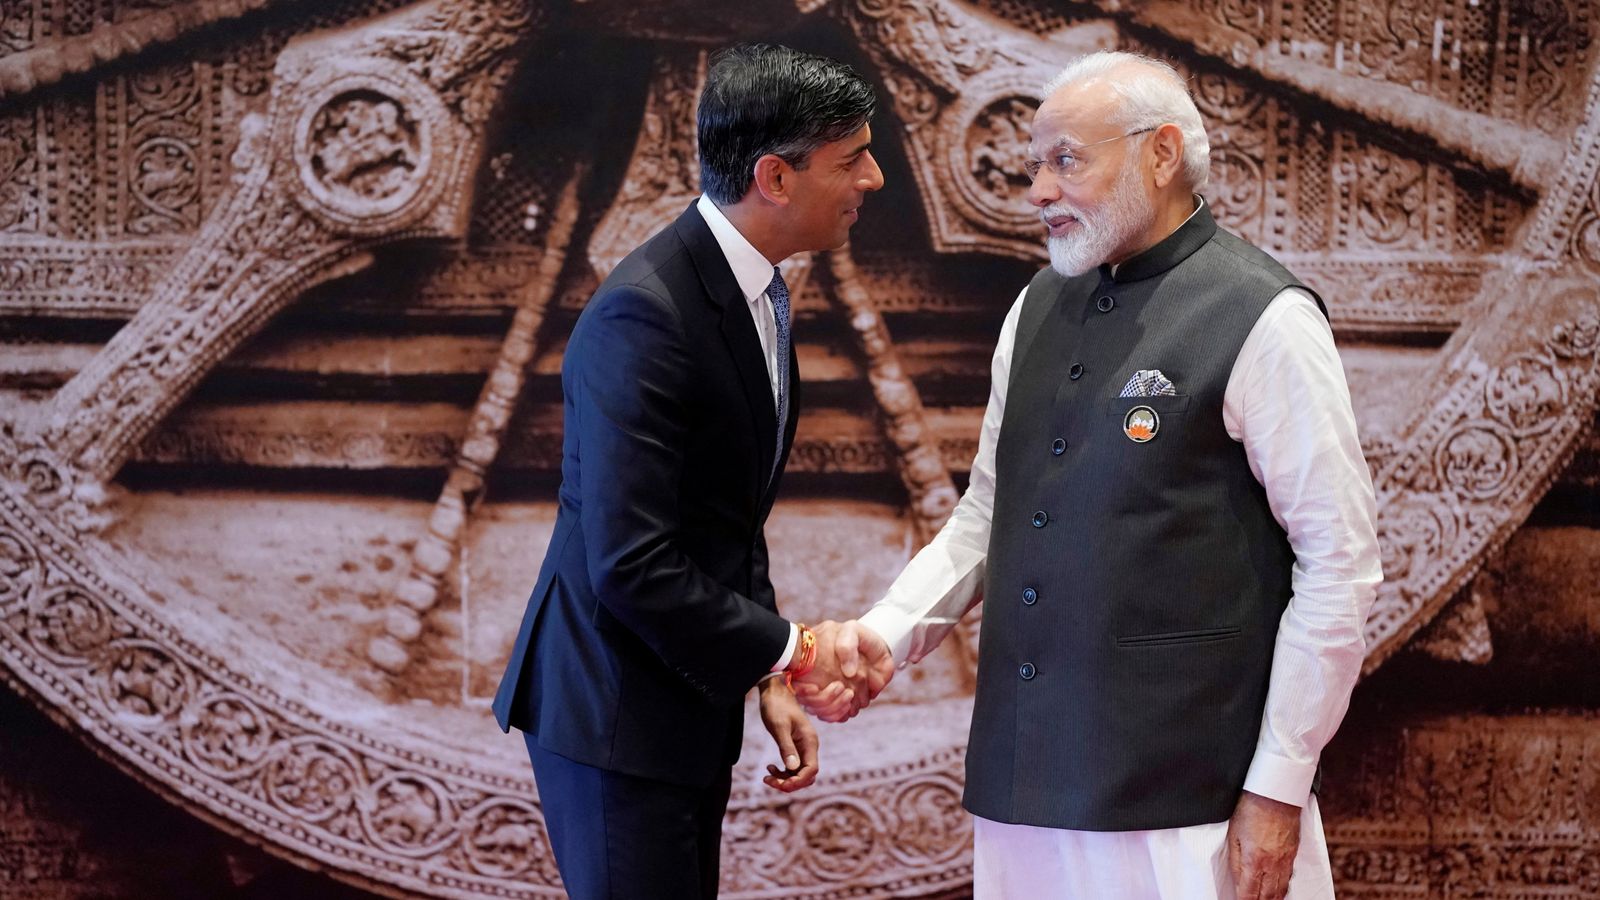 Sunak and Modi meet for talks as Indian PM says consensus reached among leaders at G20